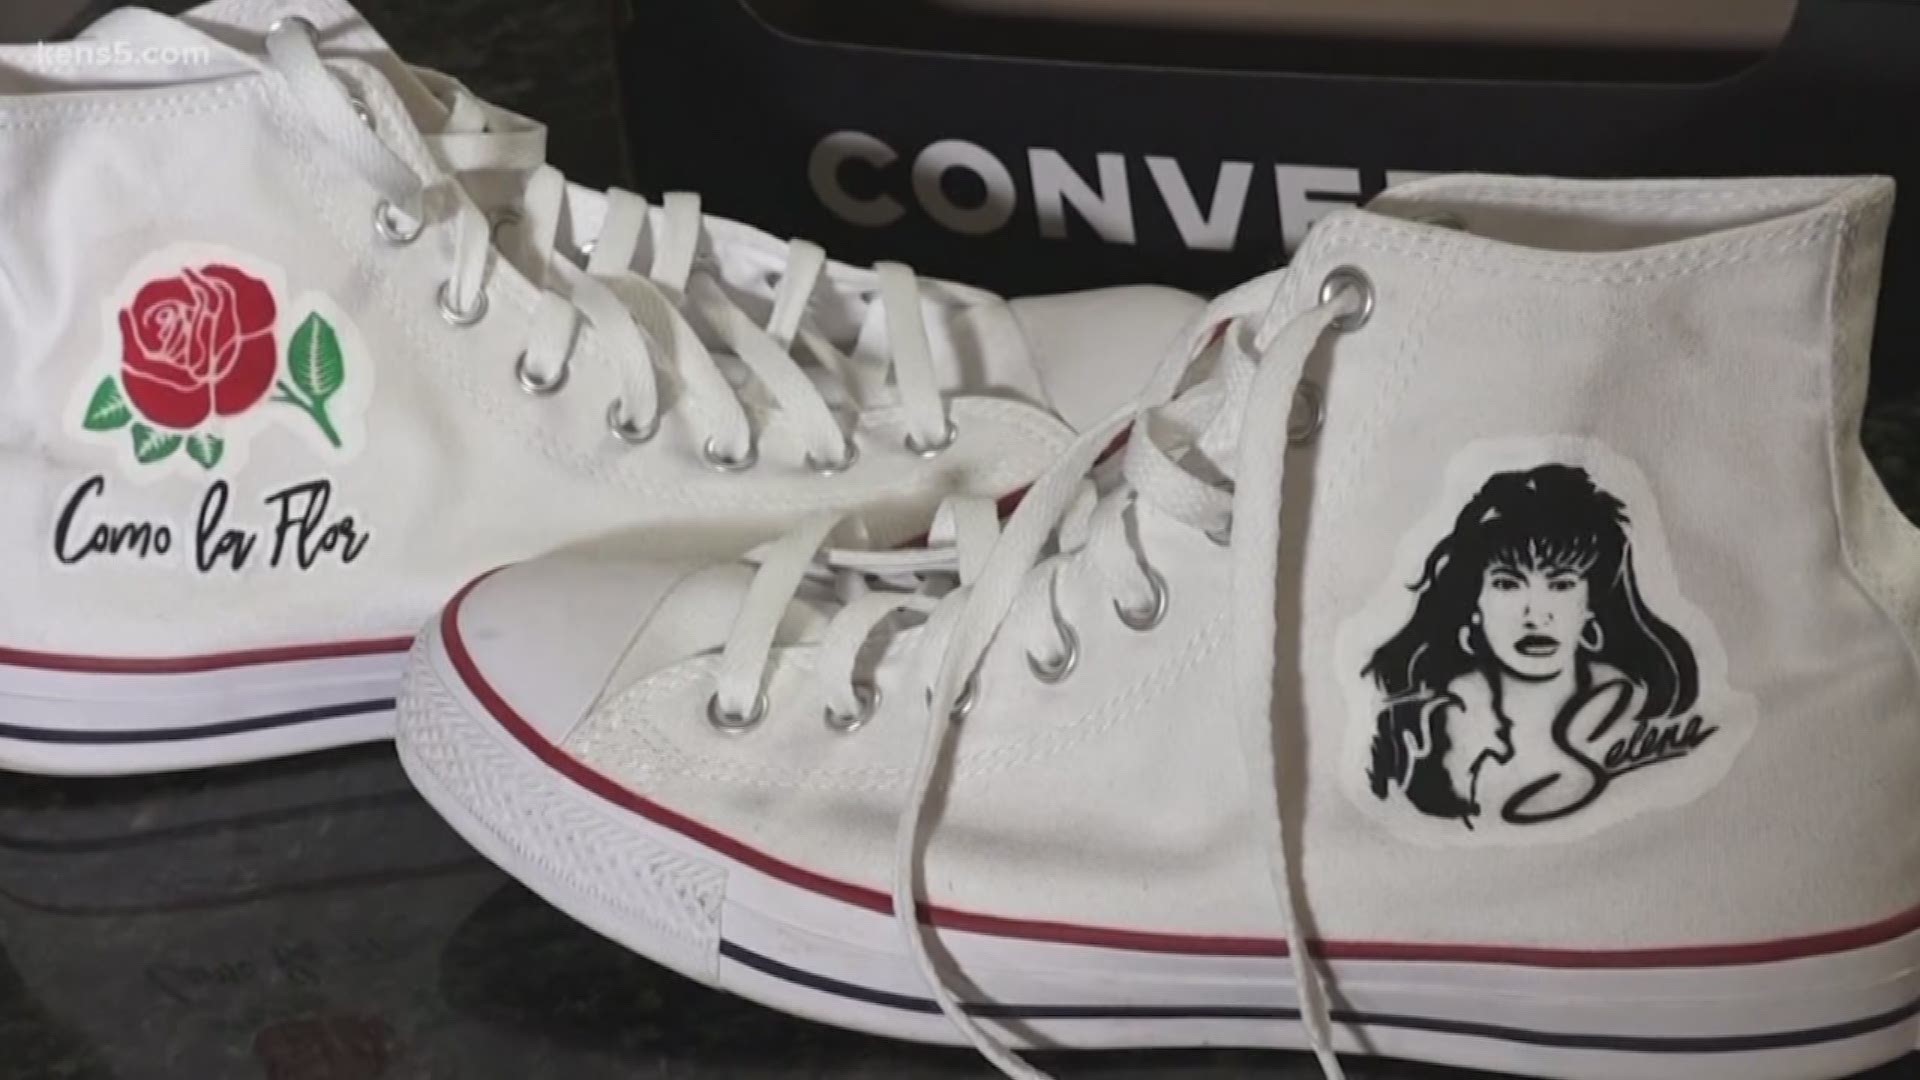 A San Antonio artist is receiving calls from all around the country after hand-painting Selena onto a pair of high-top sneakers.